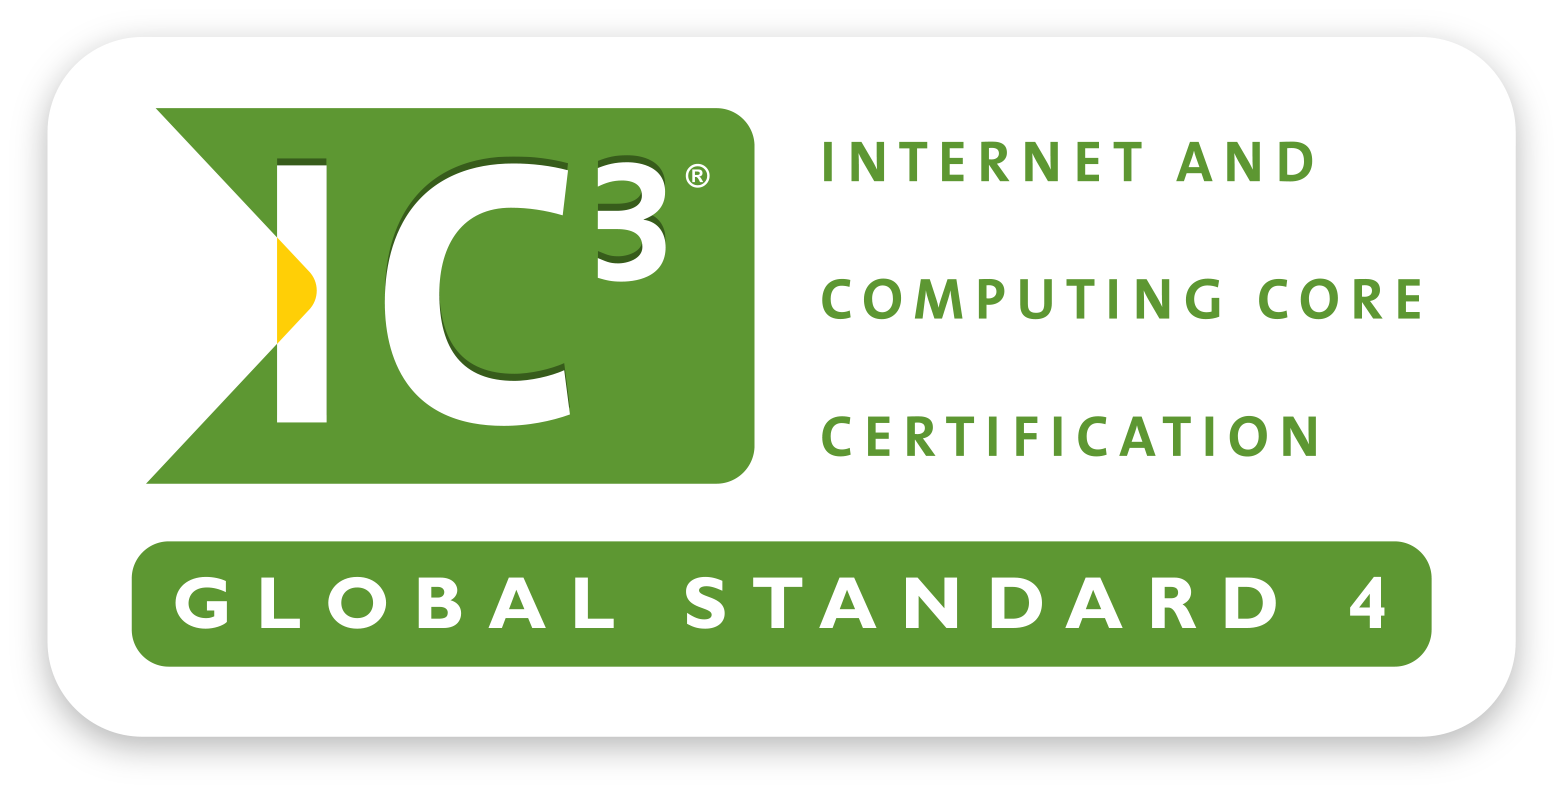 Internet and Computing Core Certification GS4